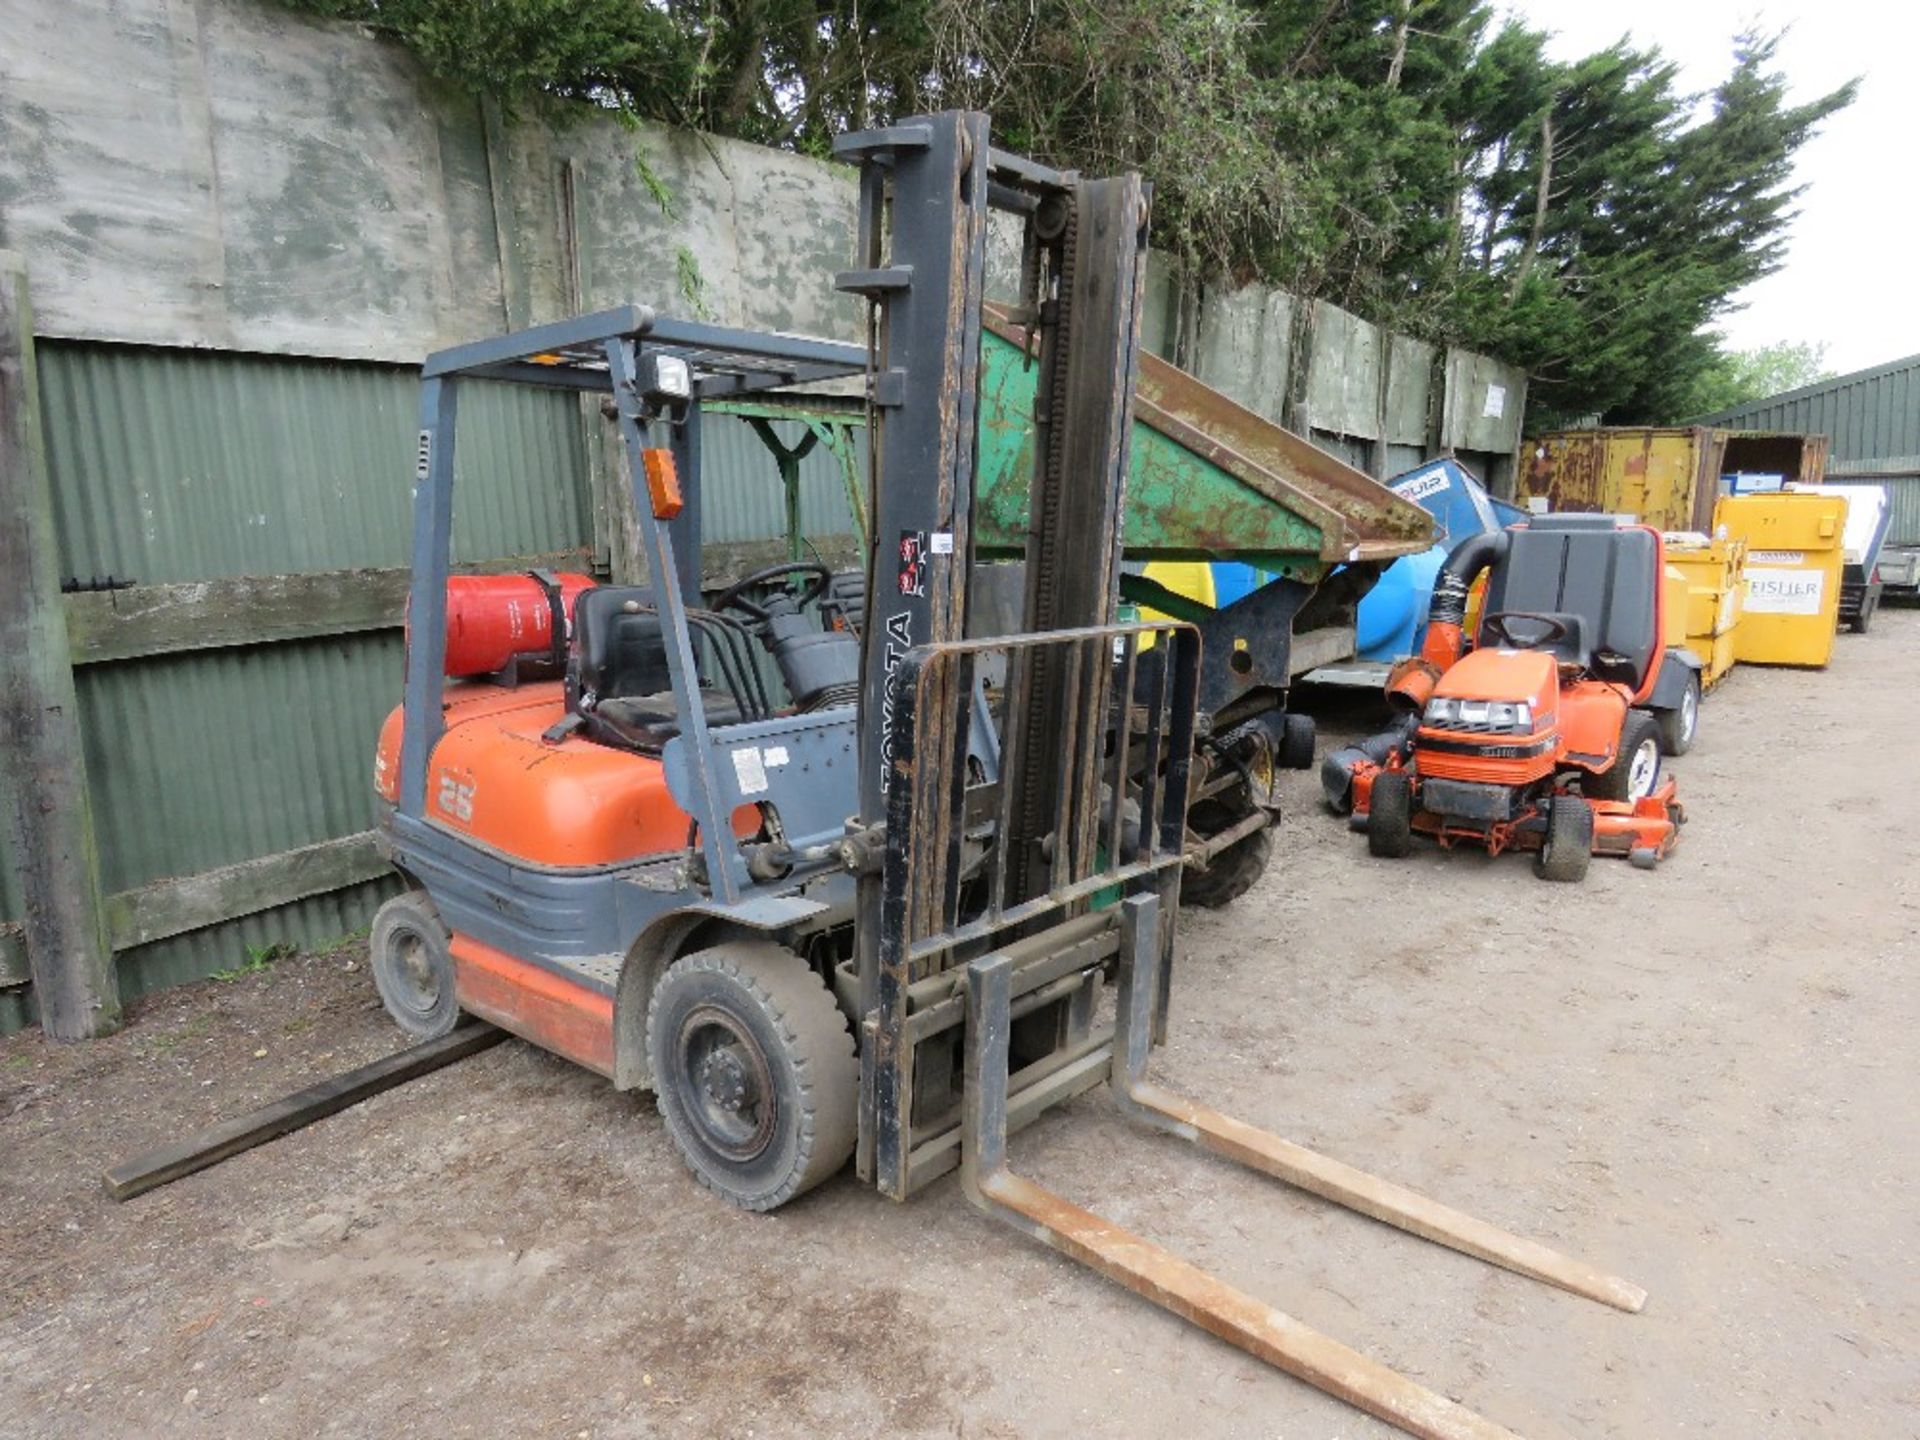 TOYOTA 25 GAS FORKLIFT TRUCK WITH SIDE SHIFT. 8994 REC HOURS. SN:406FGF25@21005 WHEN TESTED WAS SEE - Image 2 of 11